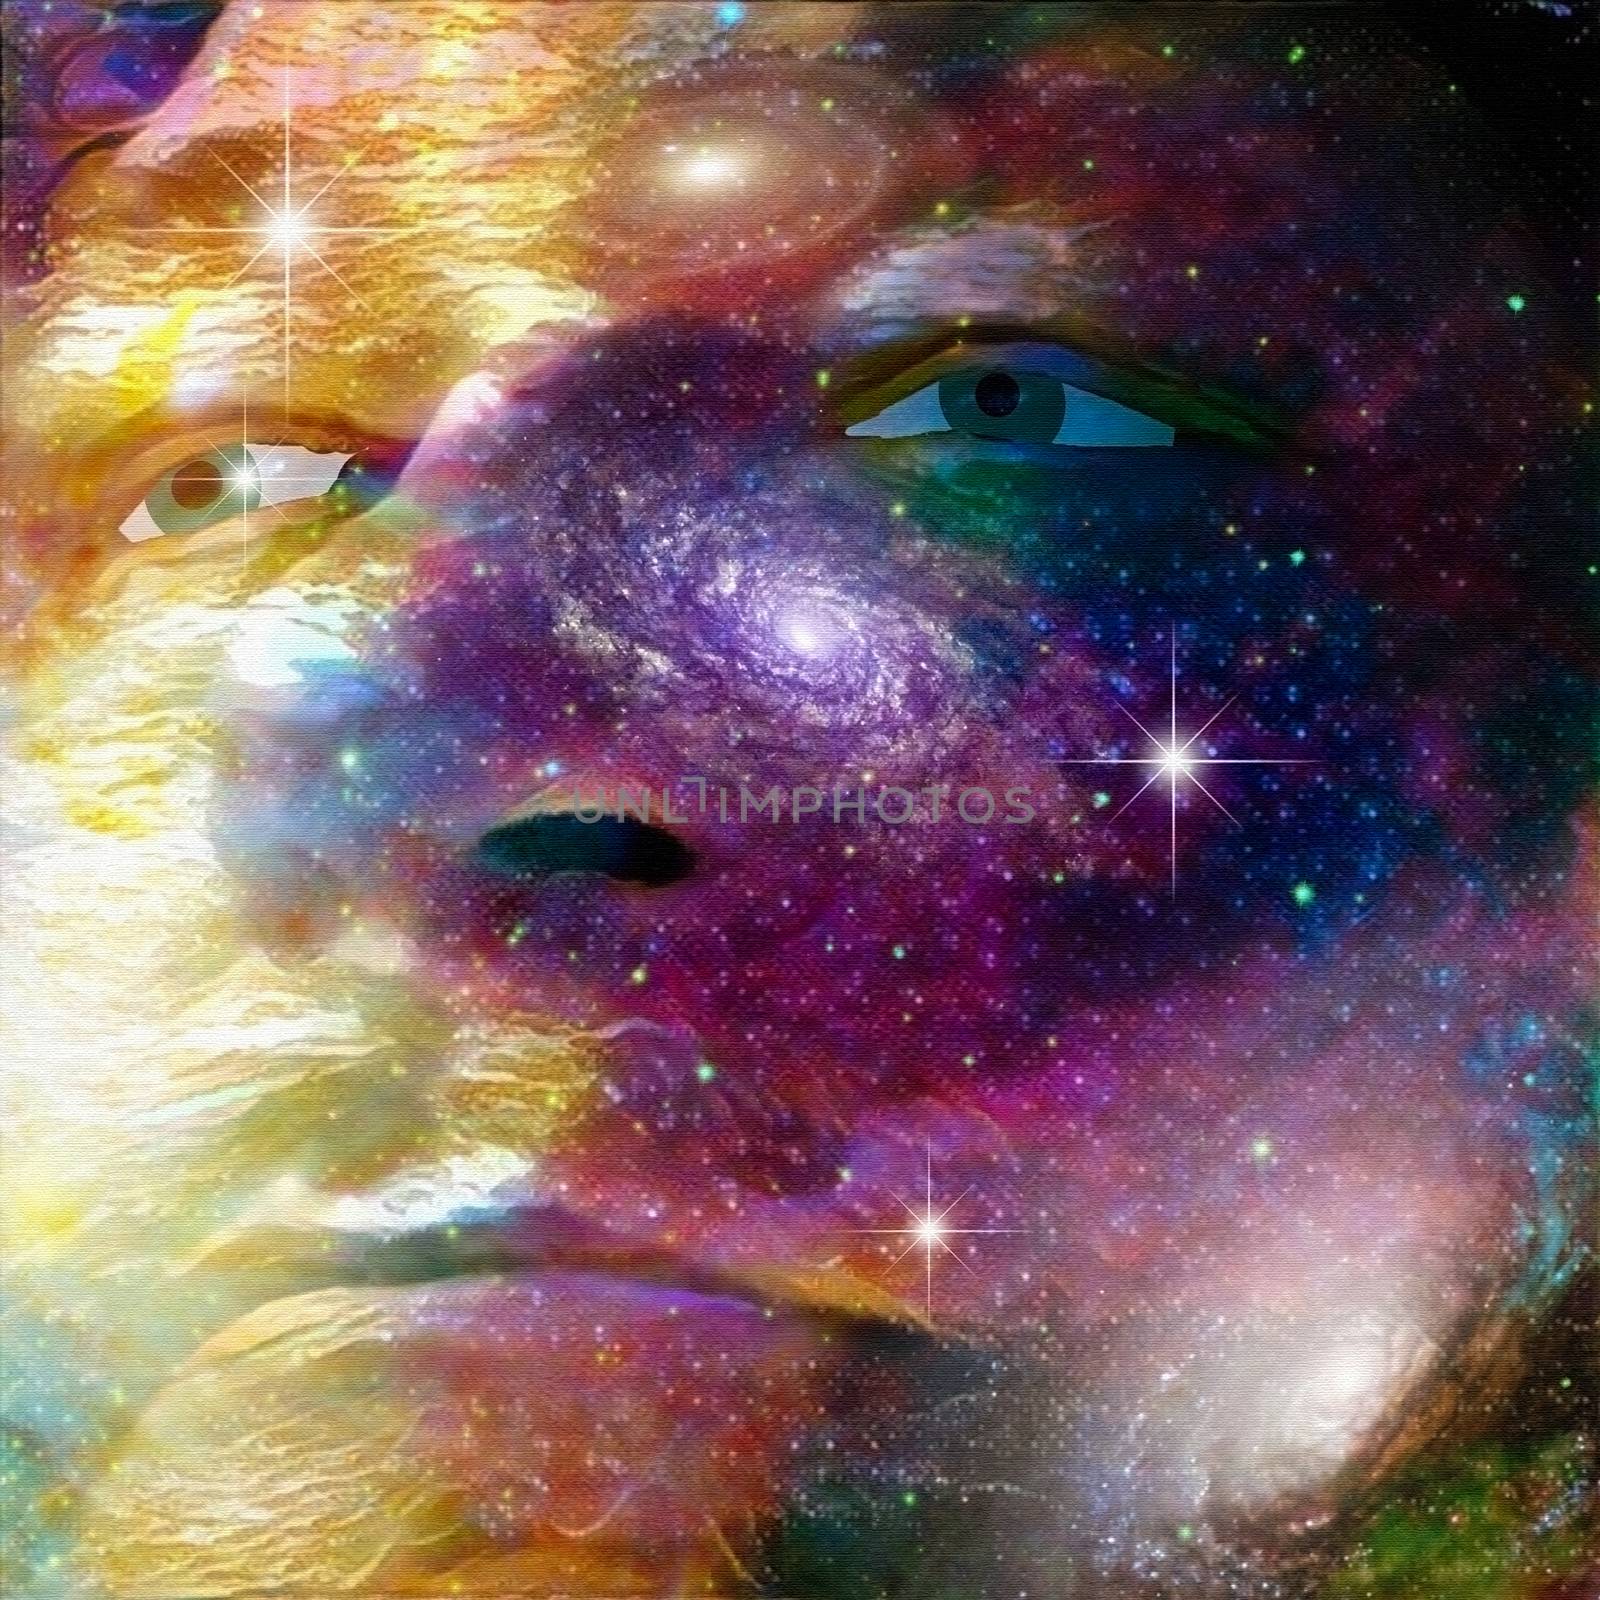 Surrealism. Man's face on deep space background.